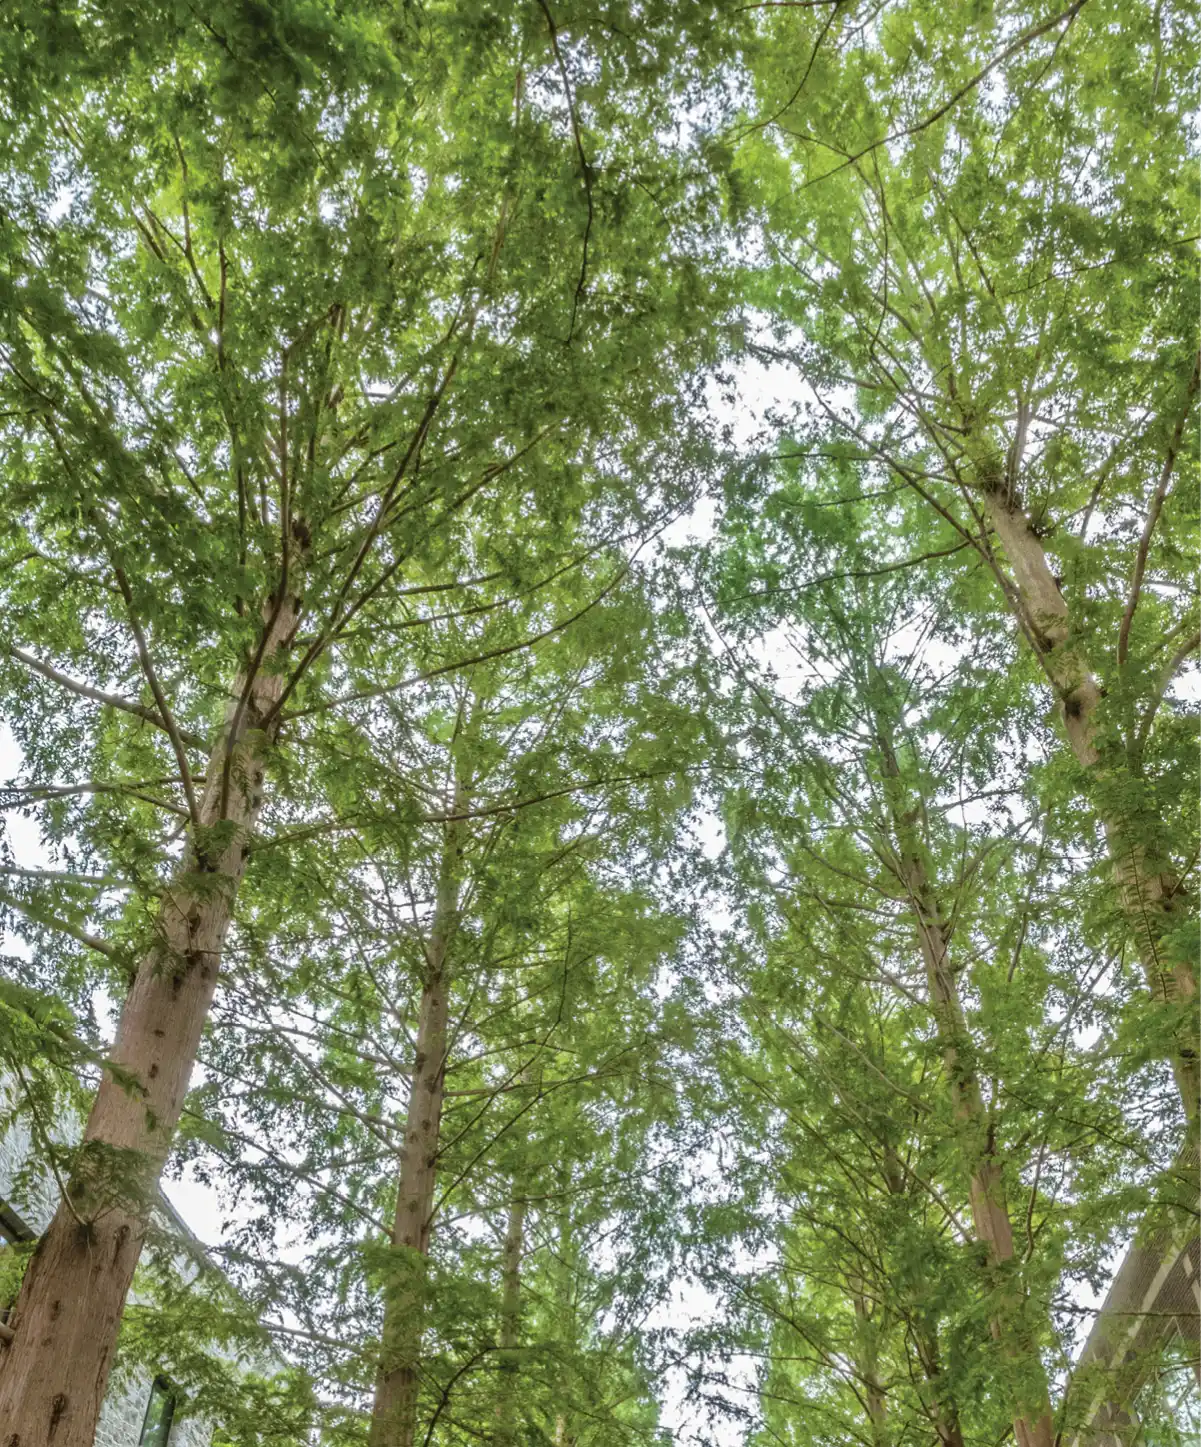 Upwards view of tall green trees and leaves